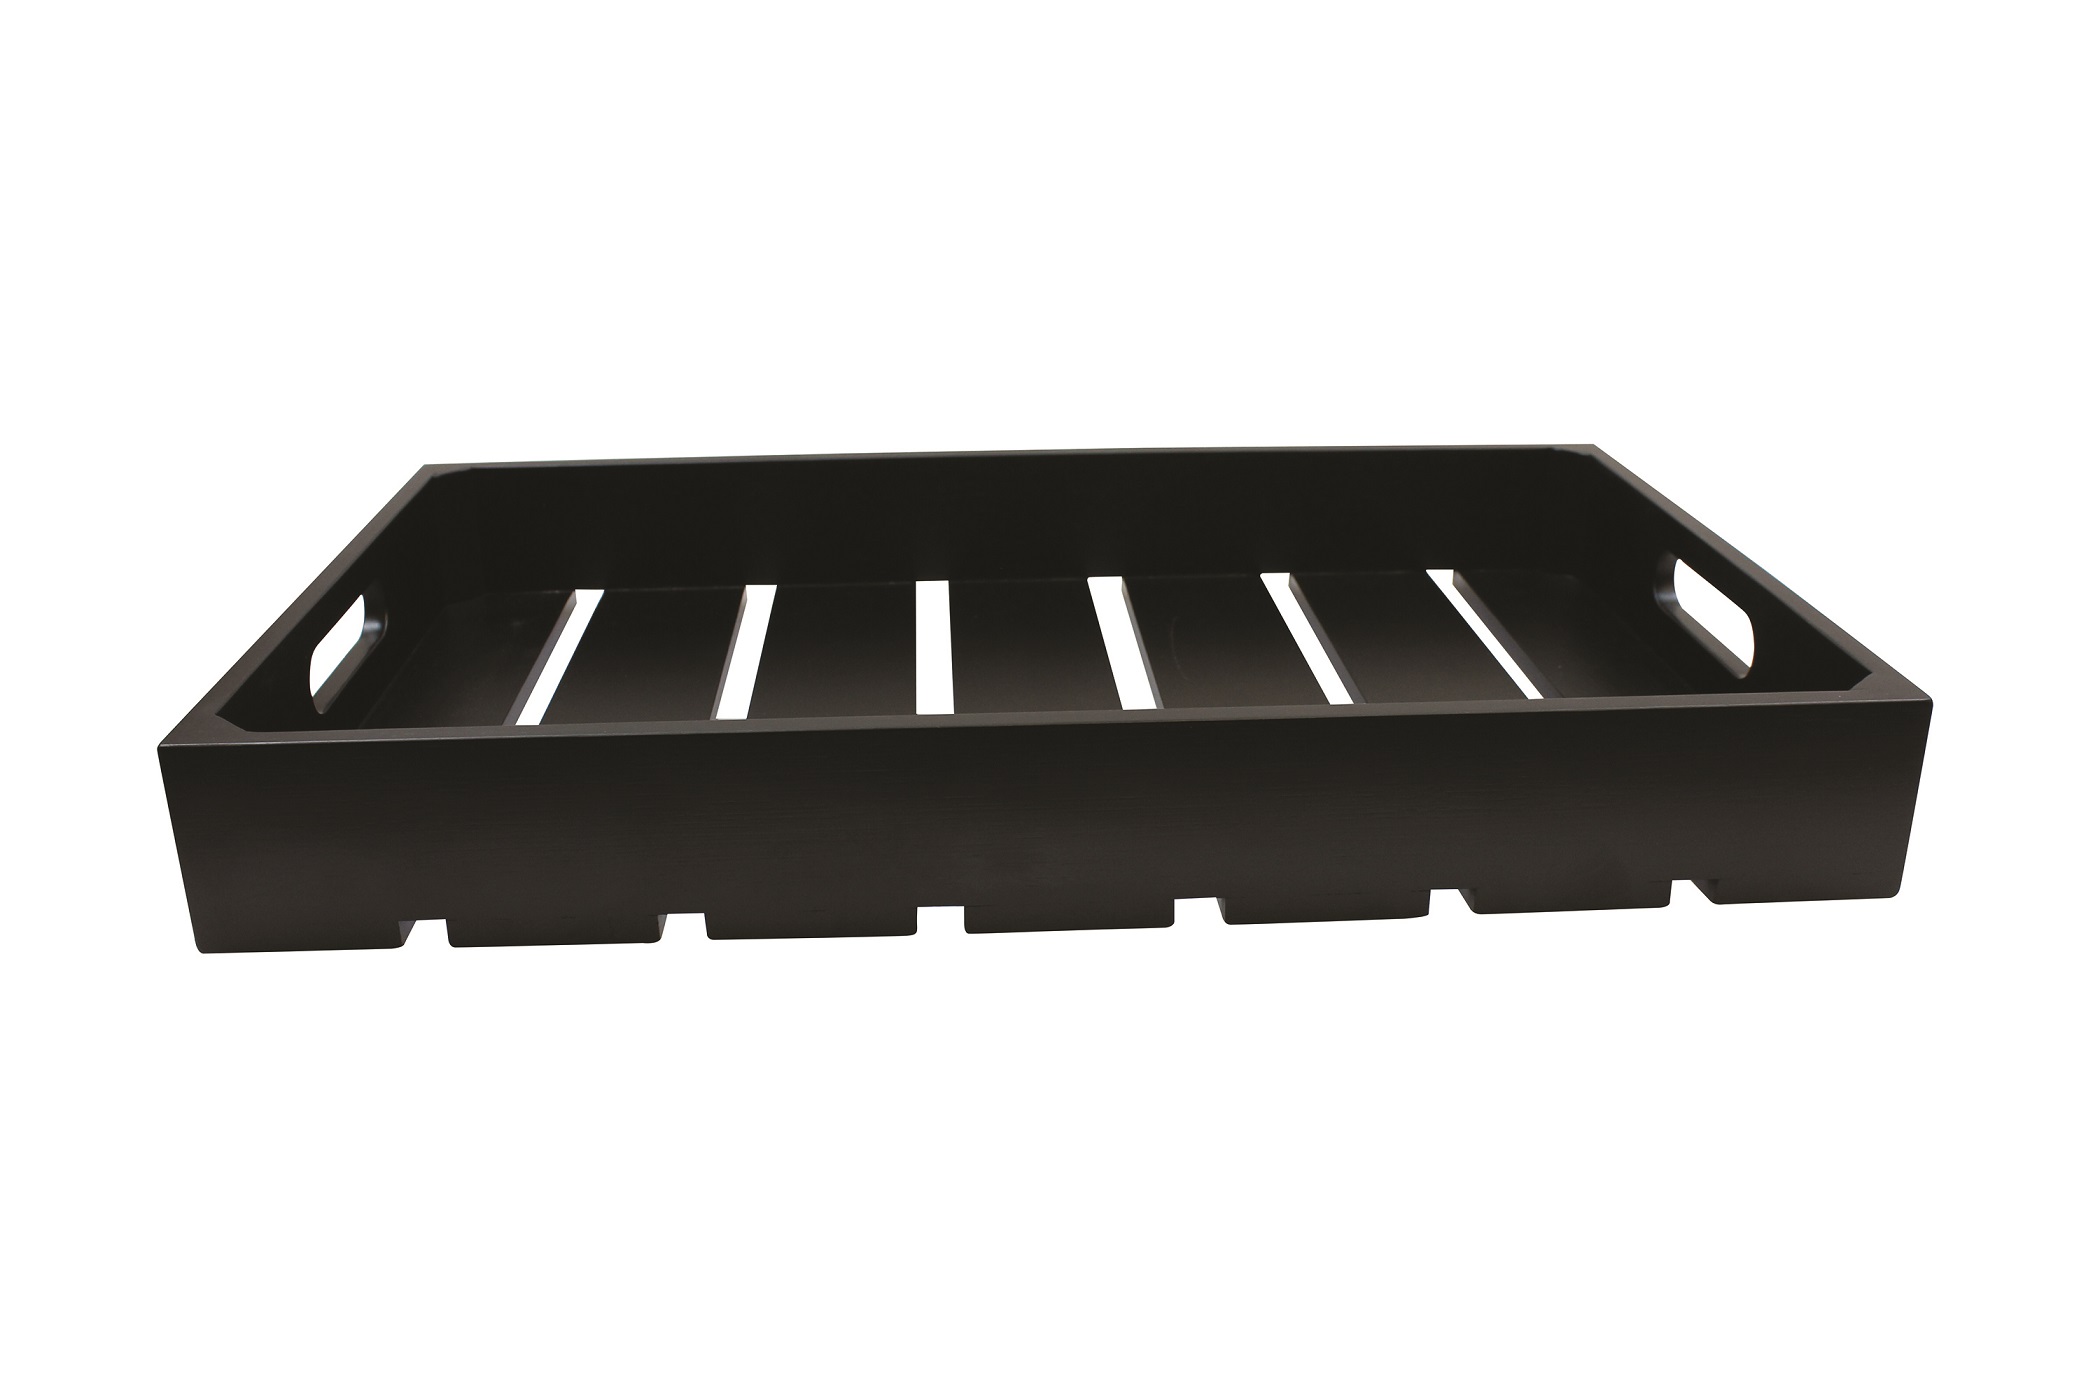 CRATE11BK 1/1 GASTRO SERVING AND DISPLAY PLATE BLACK TABLECRAFT